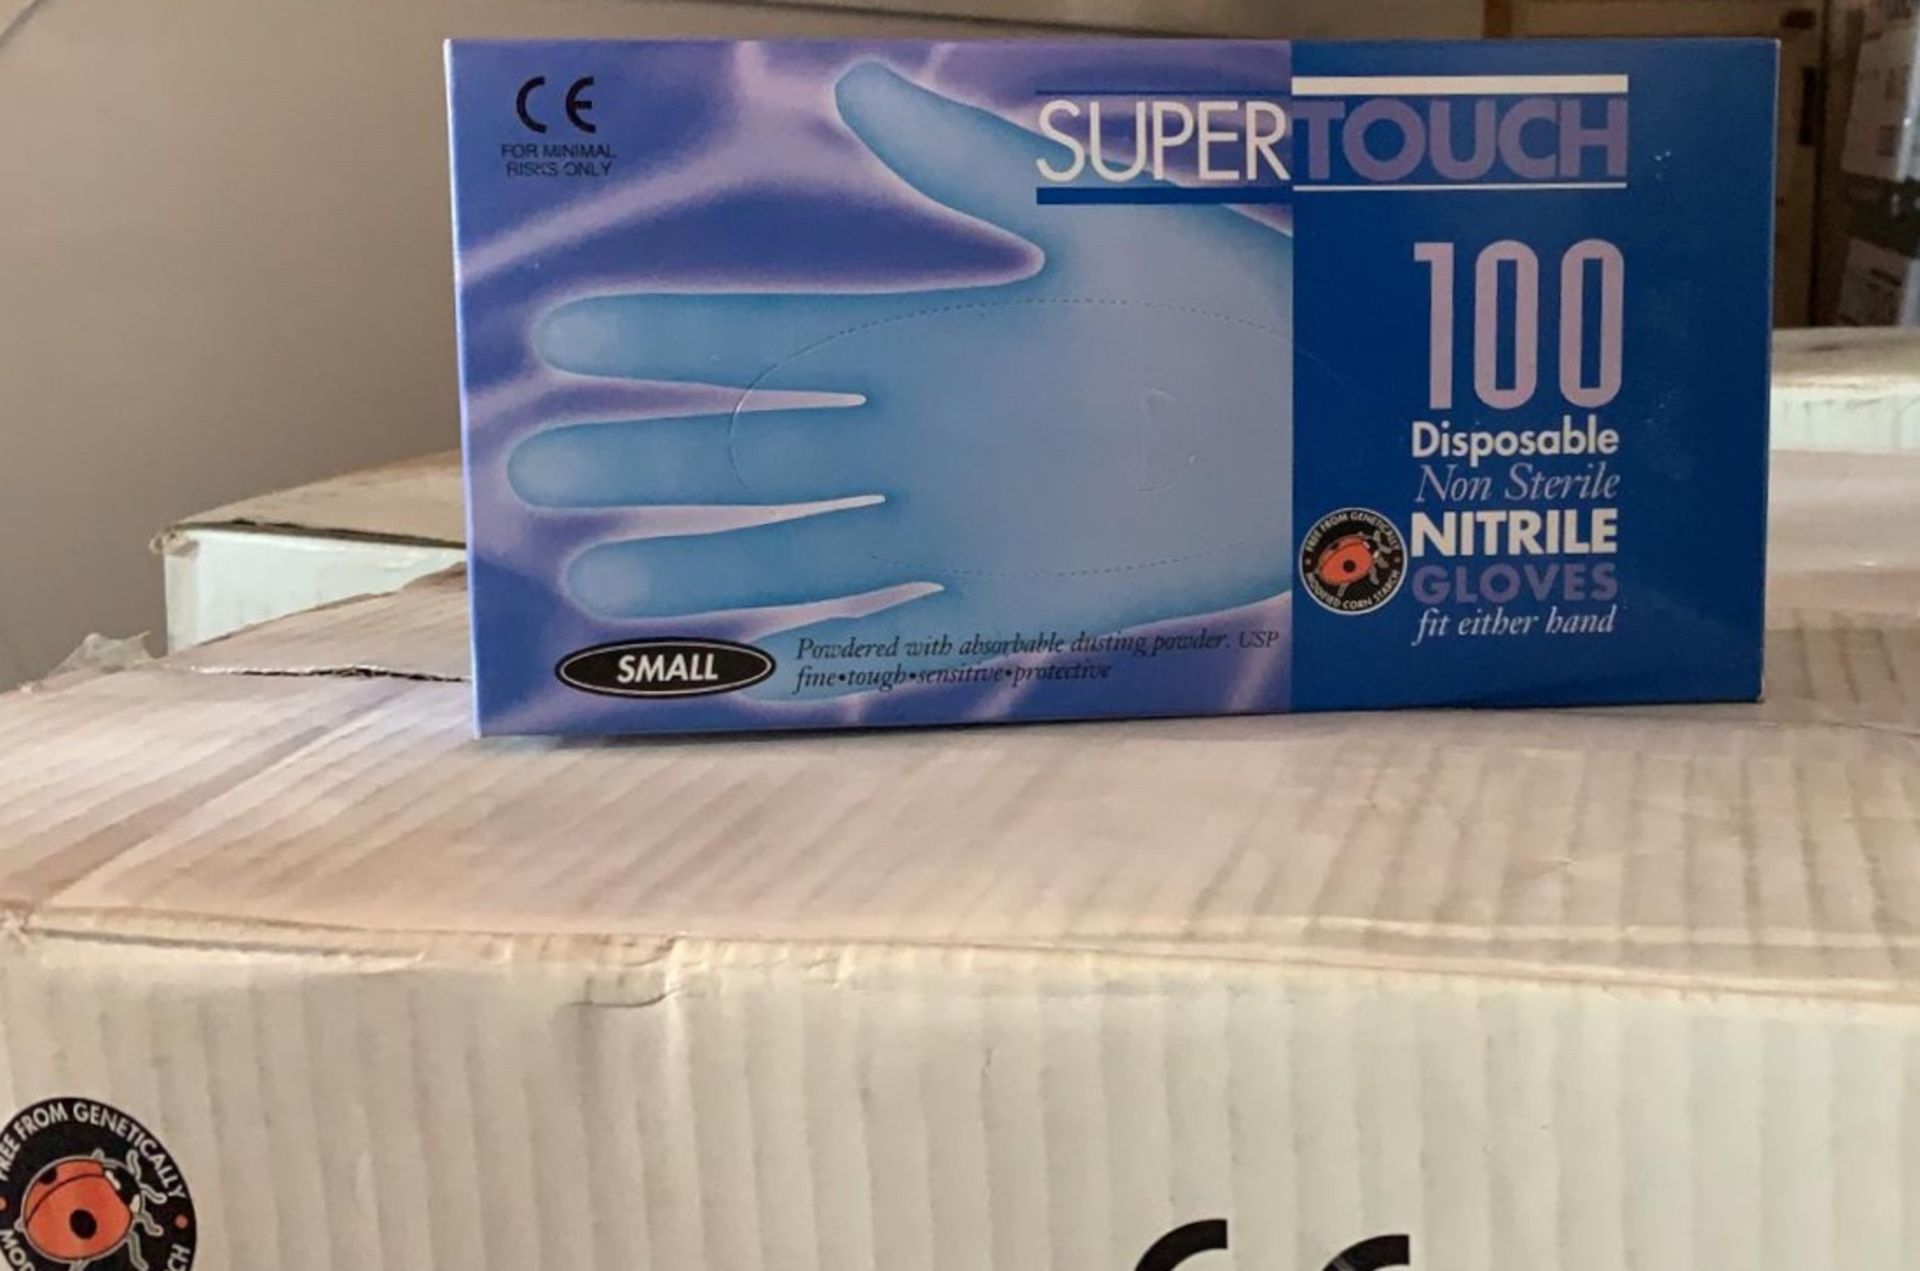 35,000 SUPERTOUCH POWDER FREE NITRILE SMALL GLOVES - Image 2 of 4